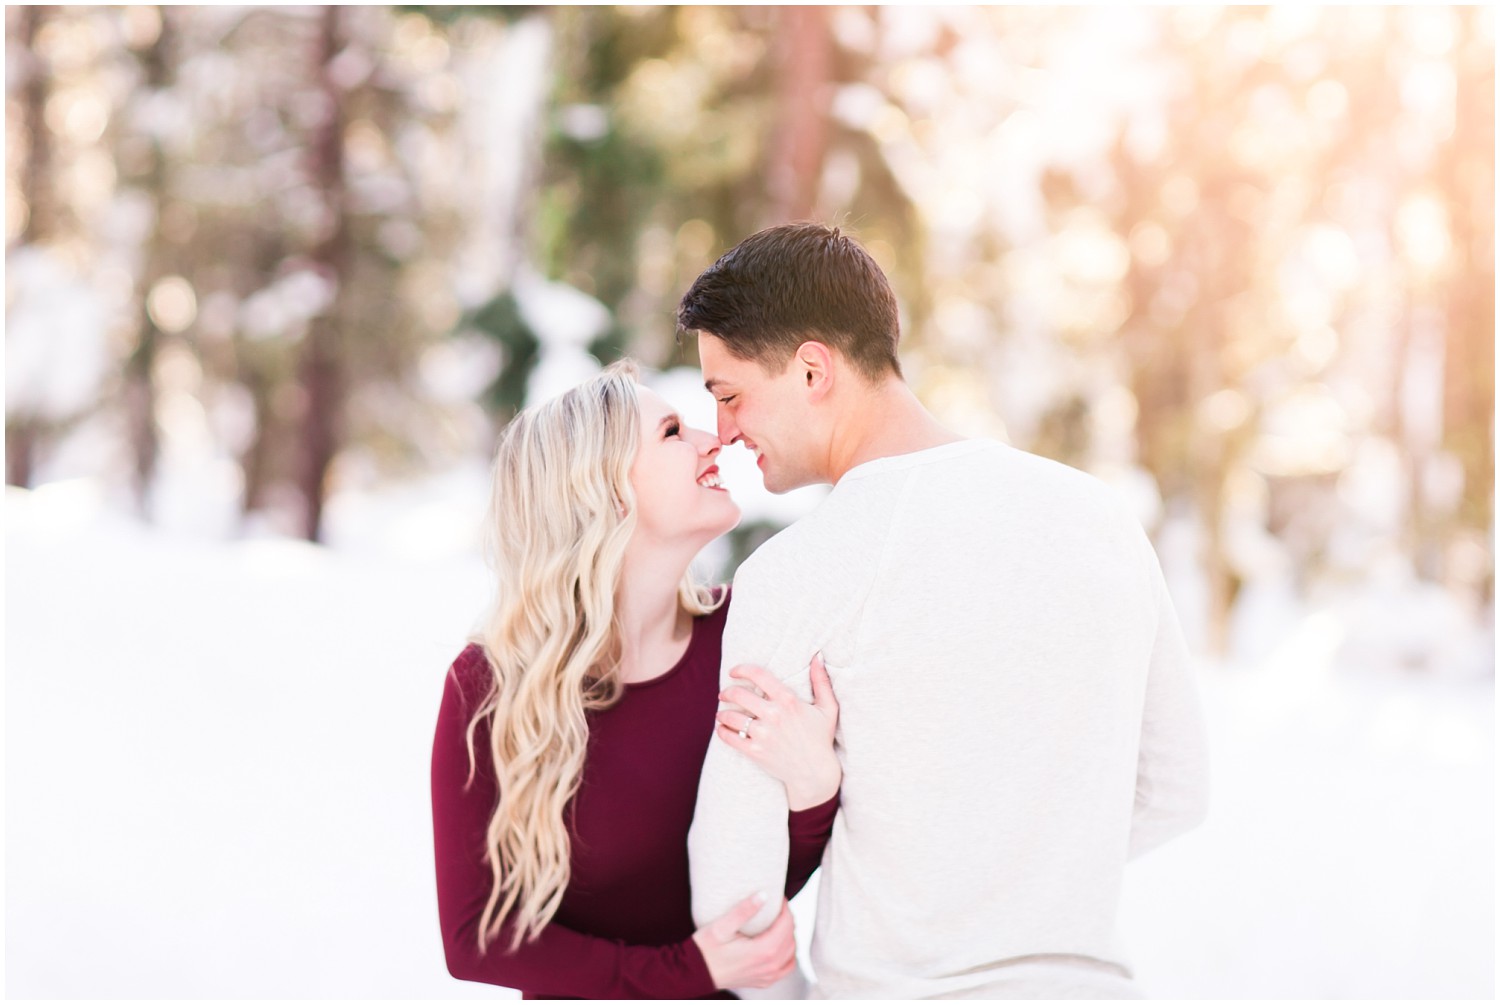 A Sunny Winter Engagement Session in Leavenworth